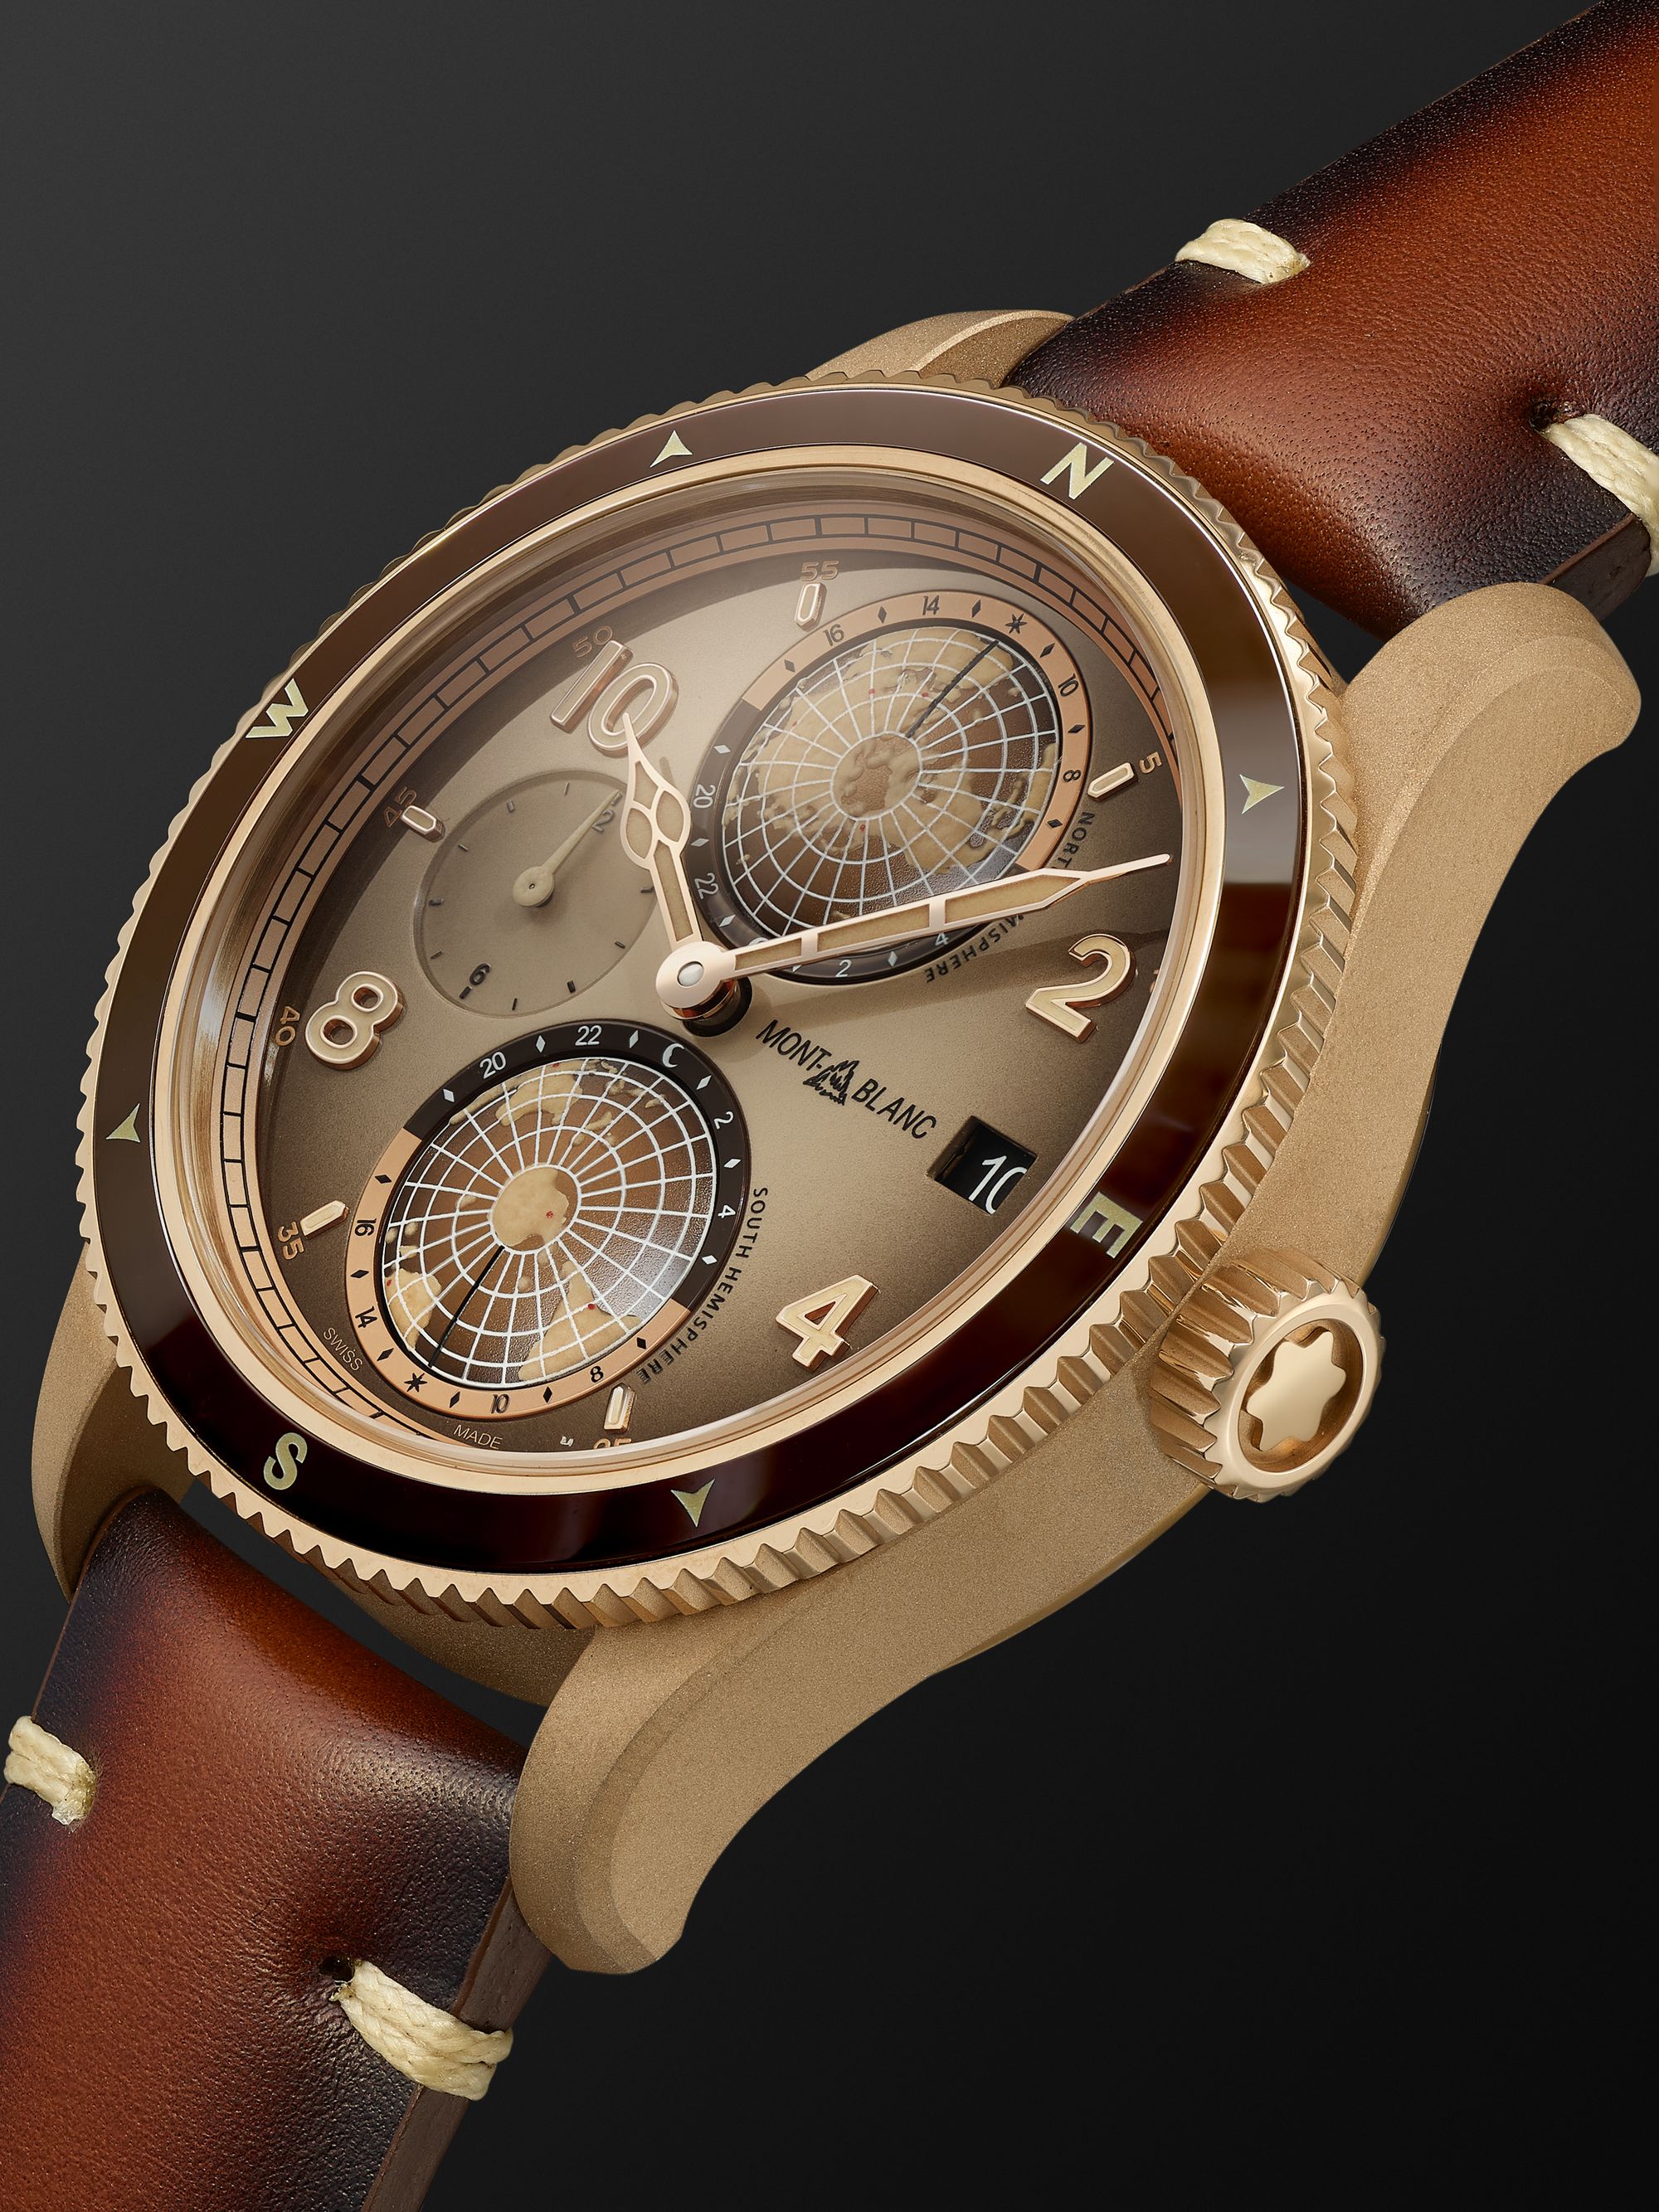 MONTBLANC 1858 Geosphere Limited Edition Automatic 42mm Bronze and Leather Watch, Ref. No. 128504